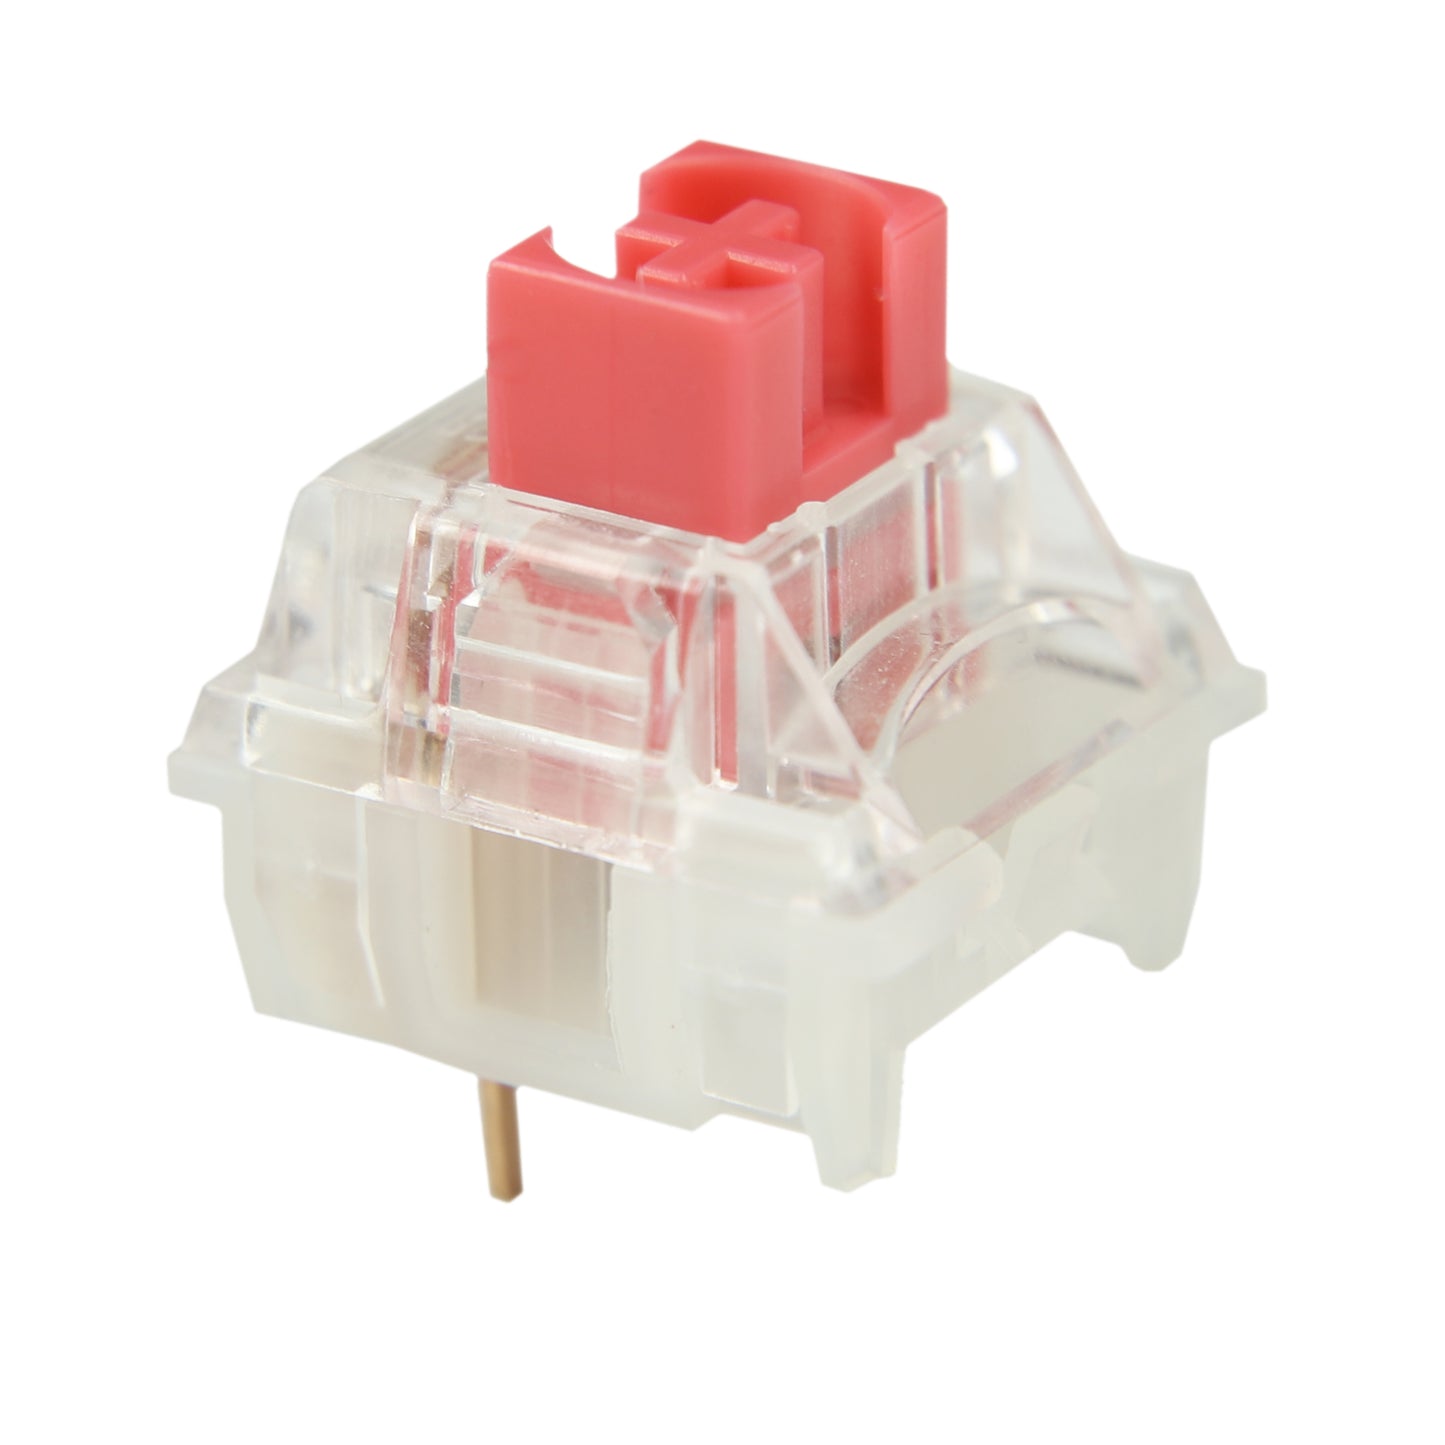 TTC Silent Red(SMD Silent 3pin 45g Linear Switches)